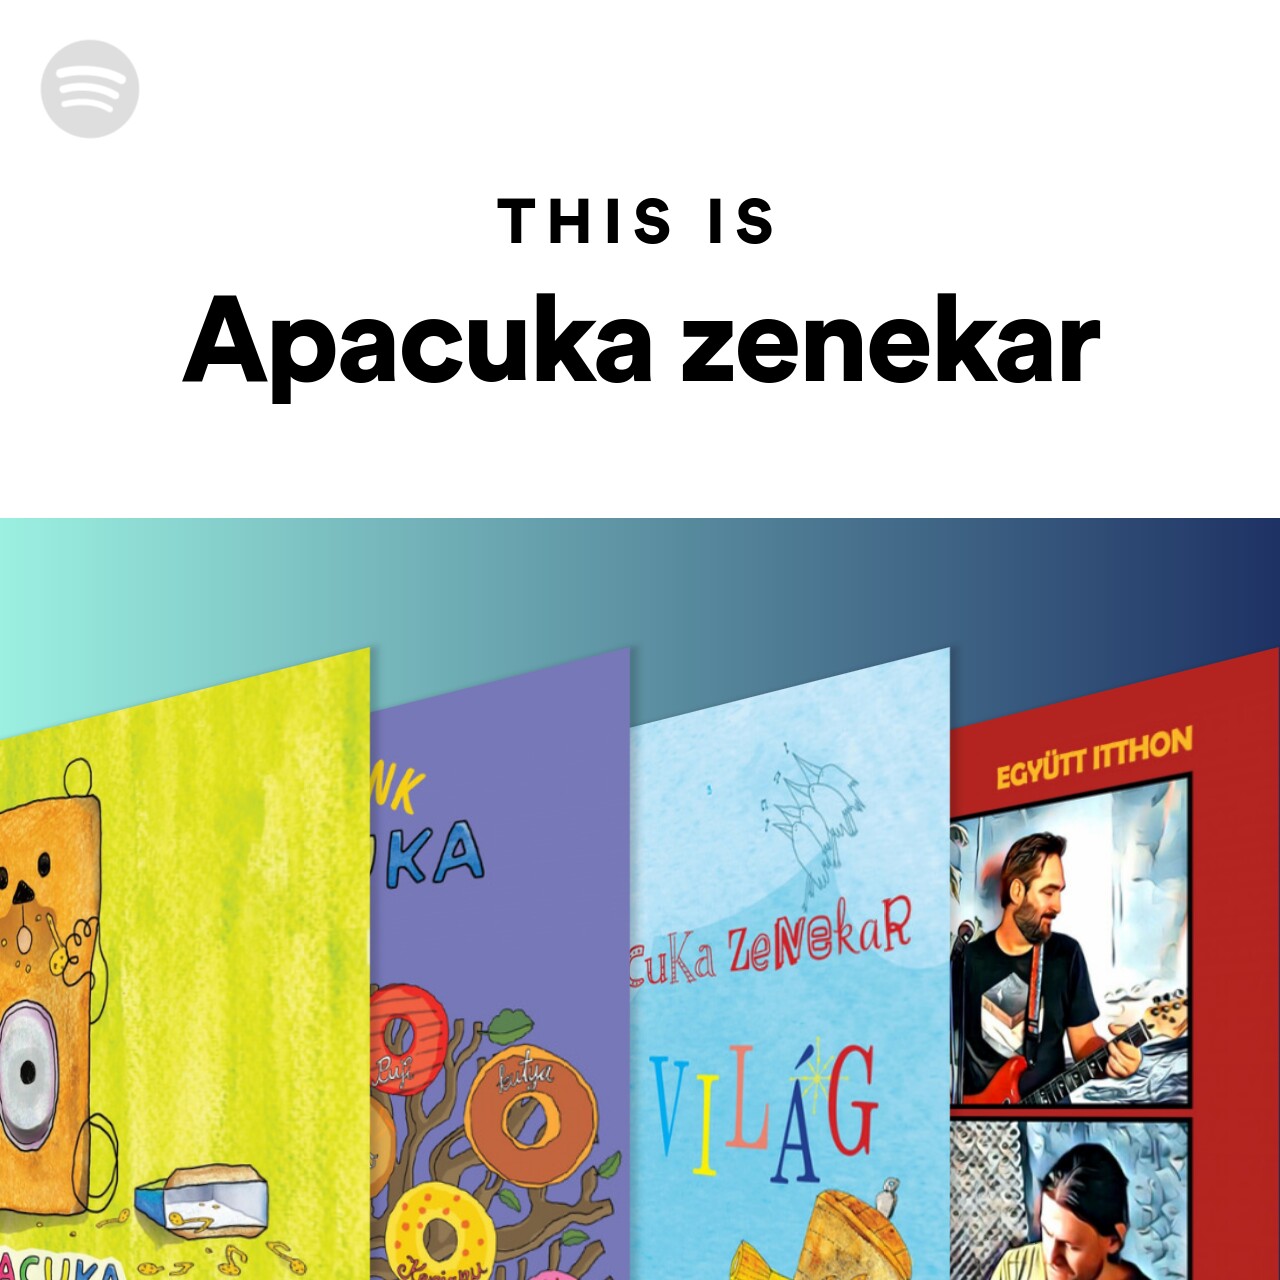 This Is Apacuka zenekar